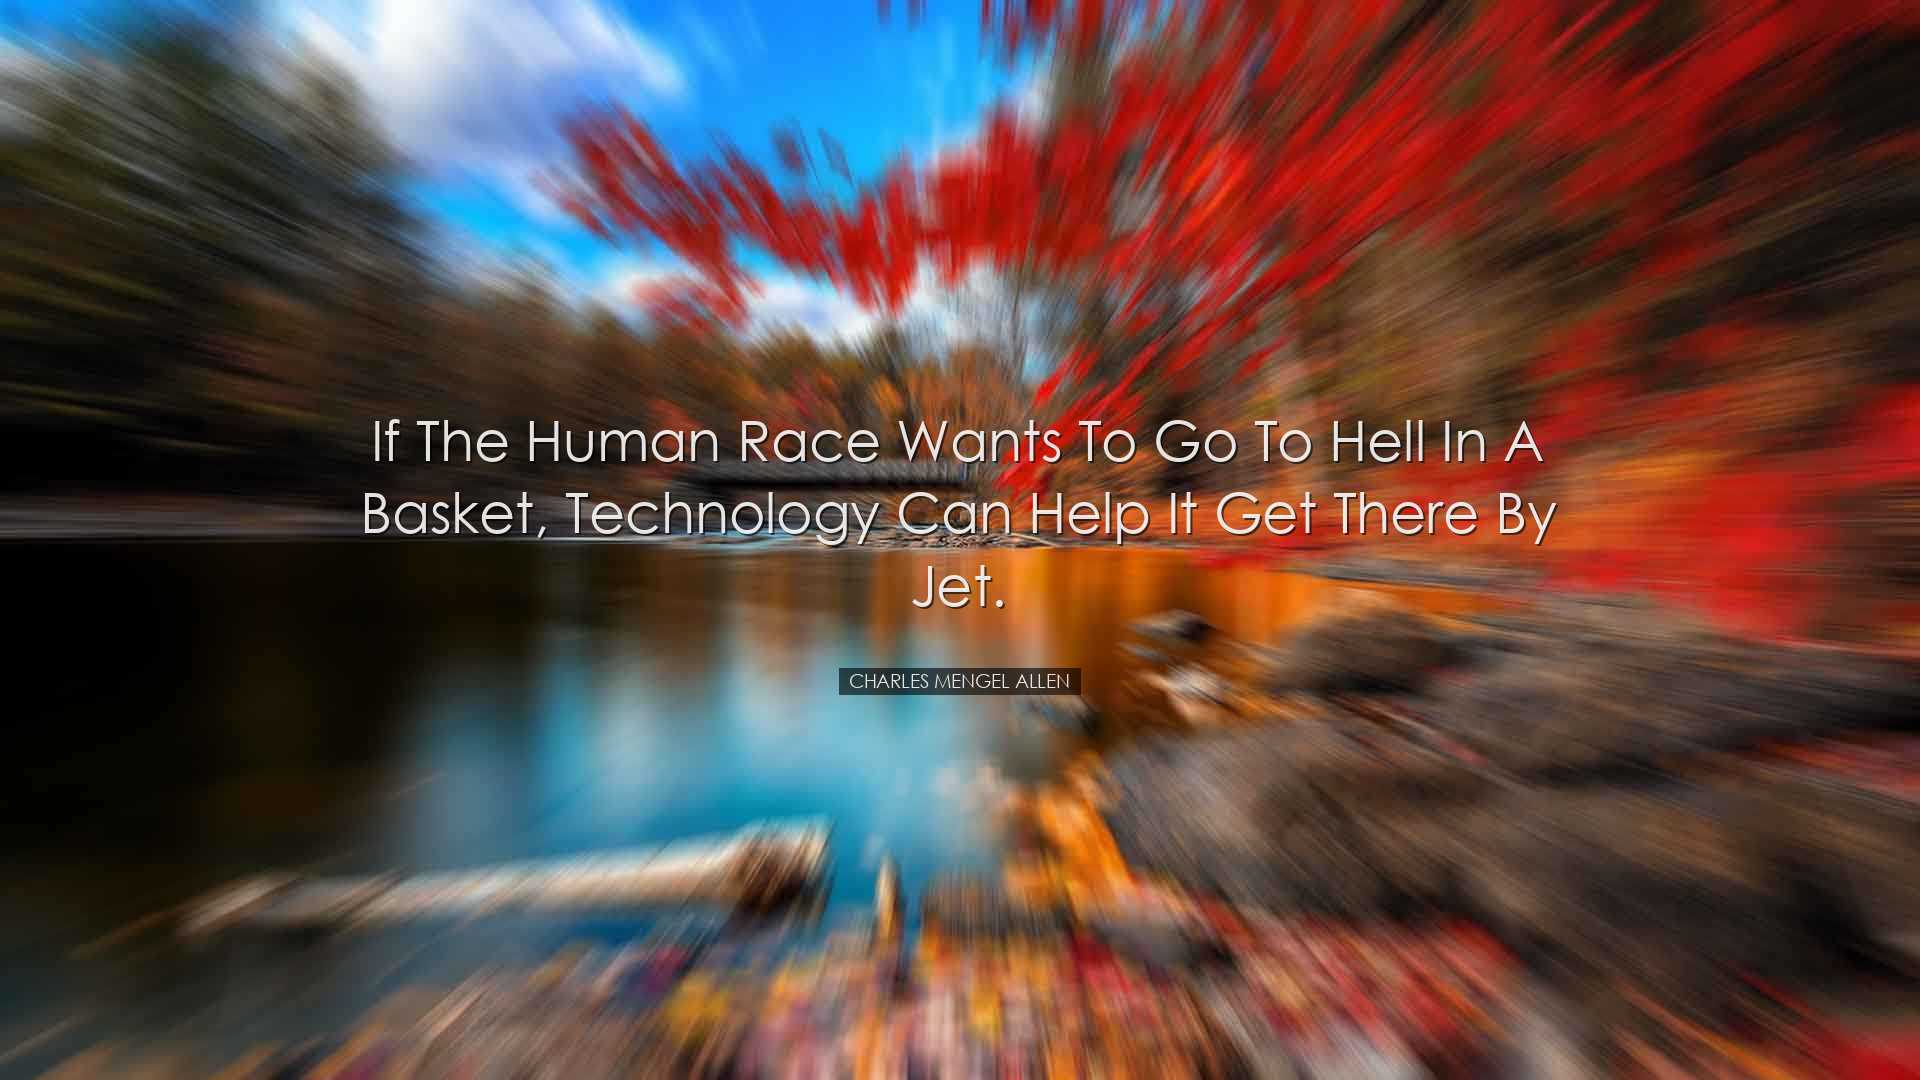 If the human race wants to go to hell in a basket, technology can